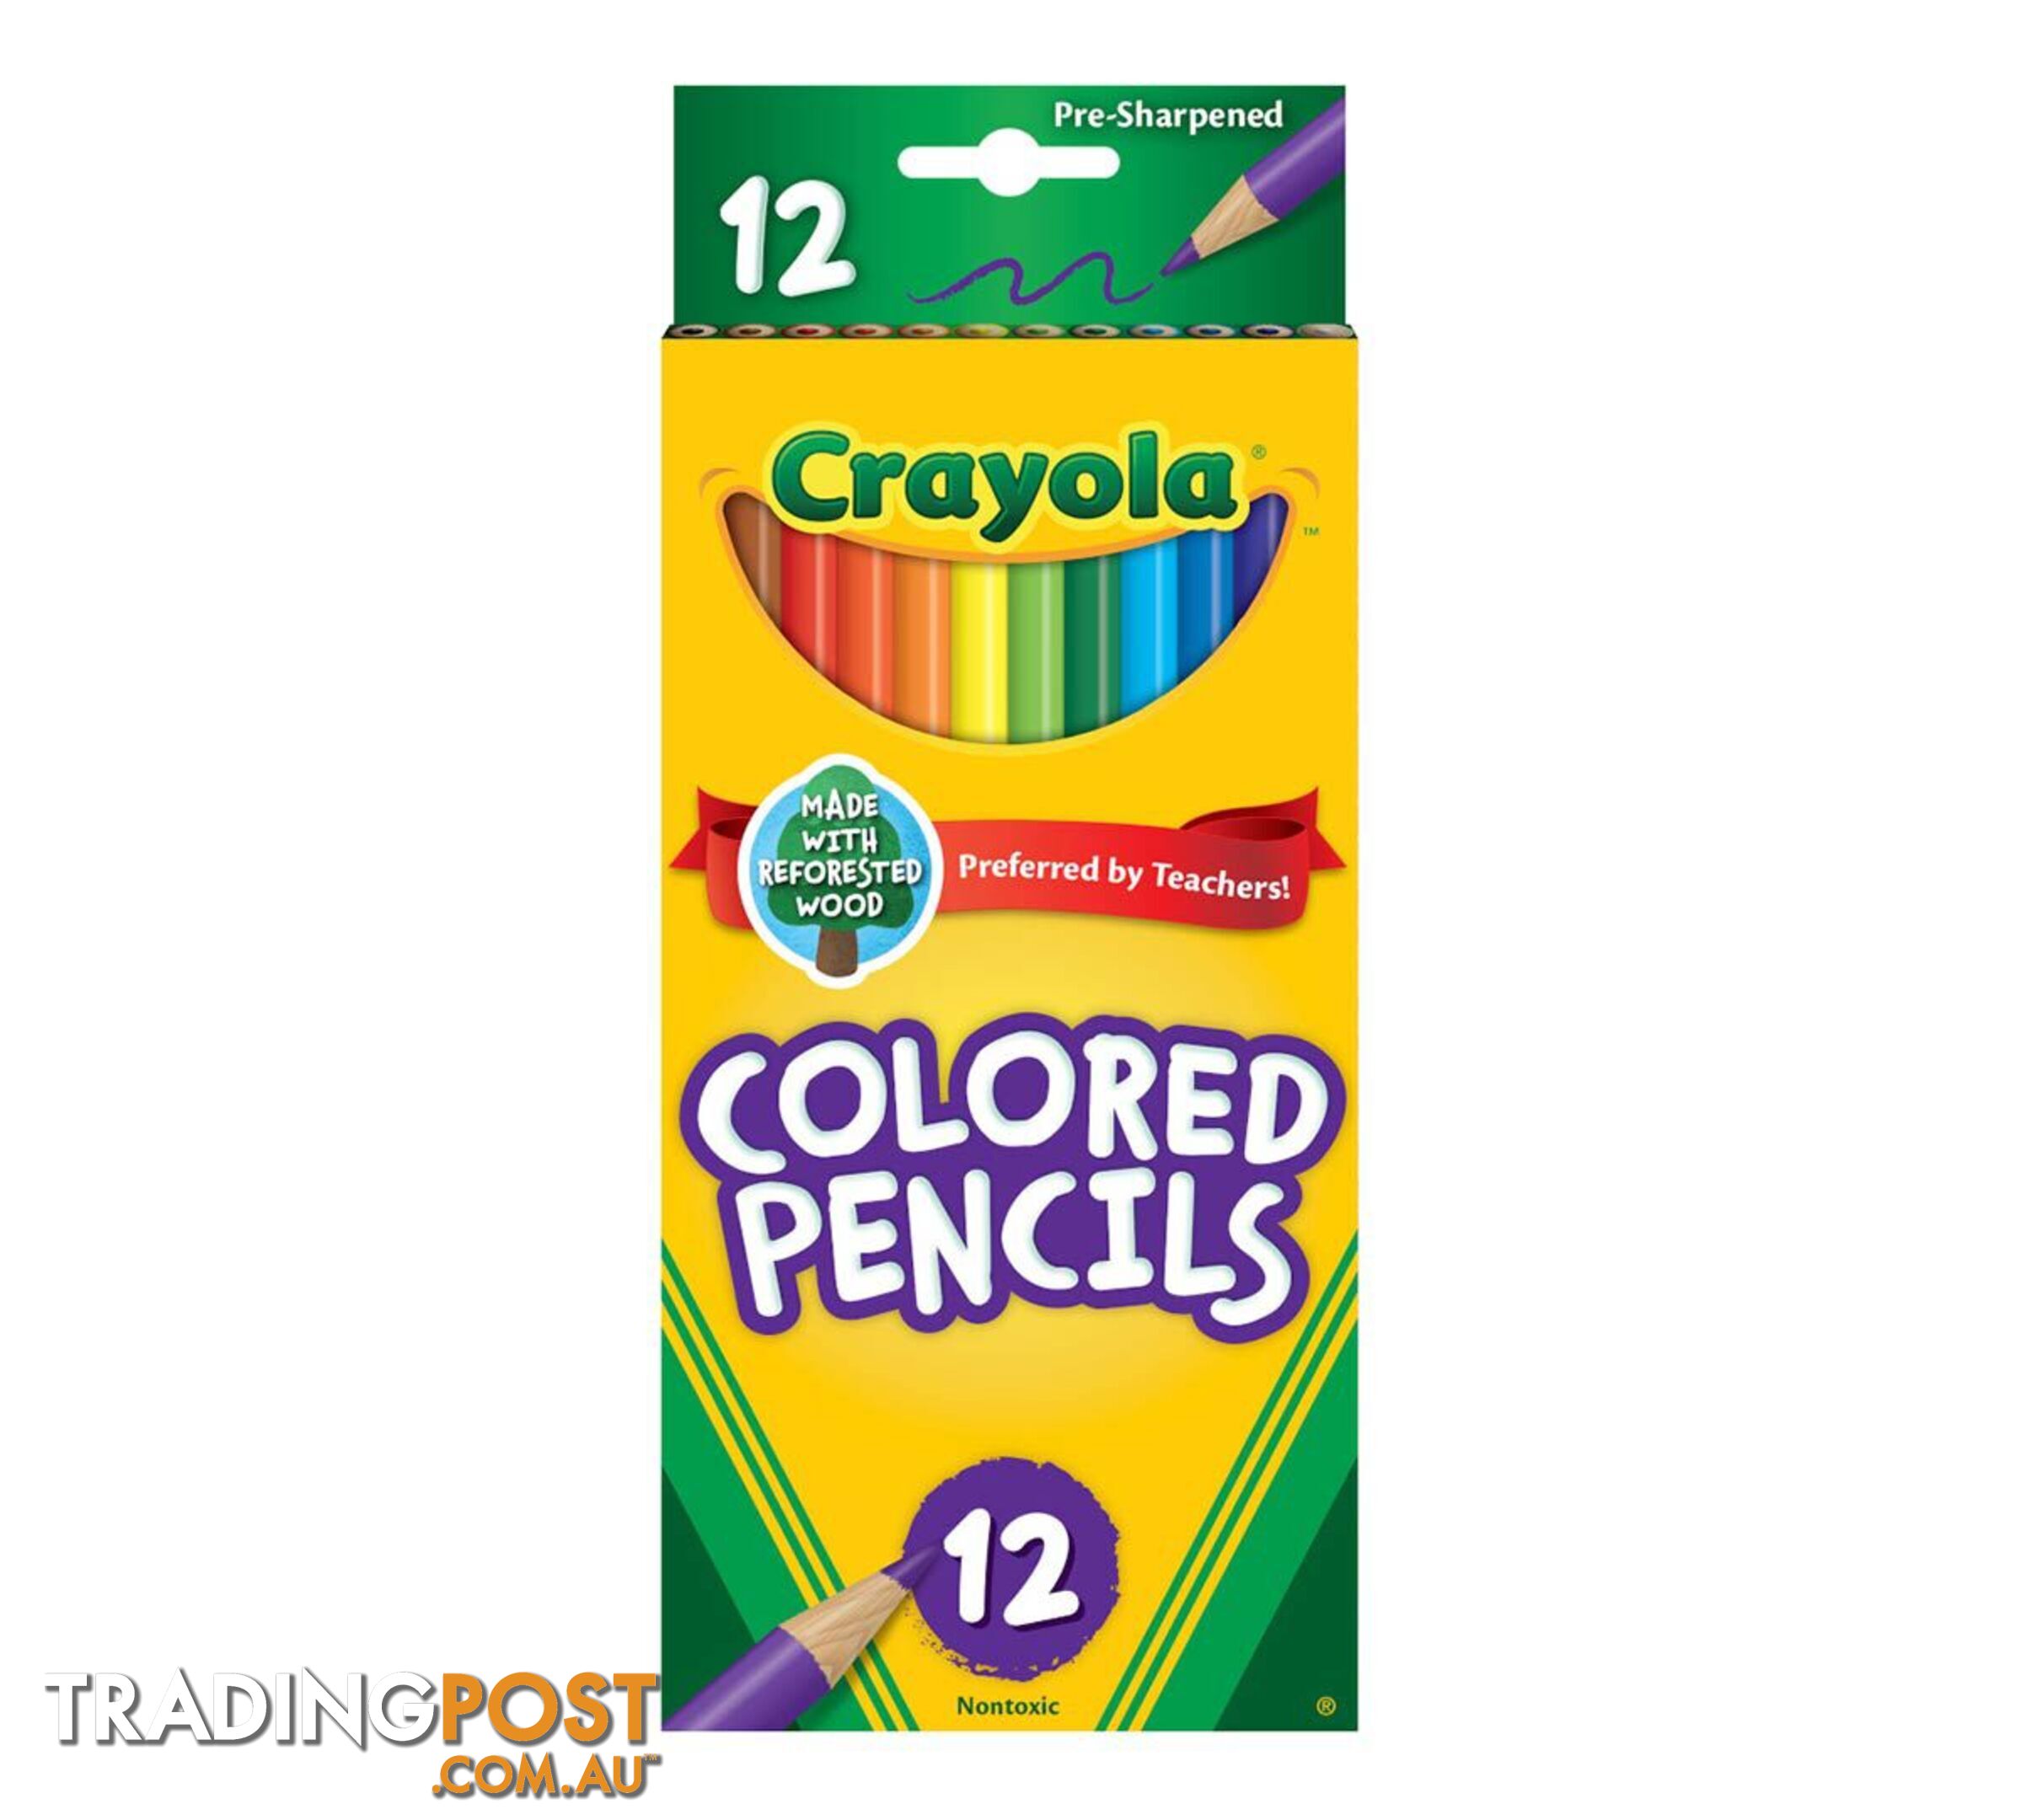 Crayola - Pencils Full Size 12 Count - Bs684012 - 71662040123